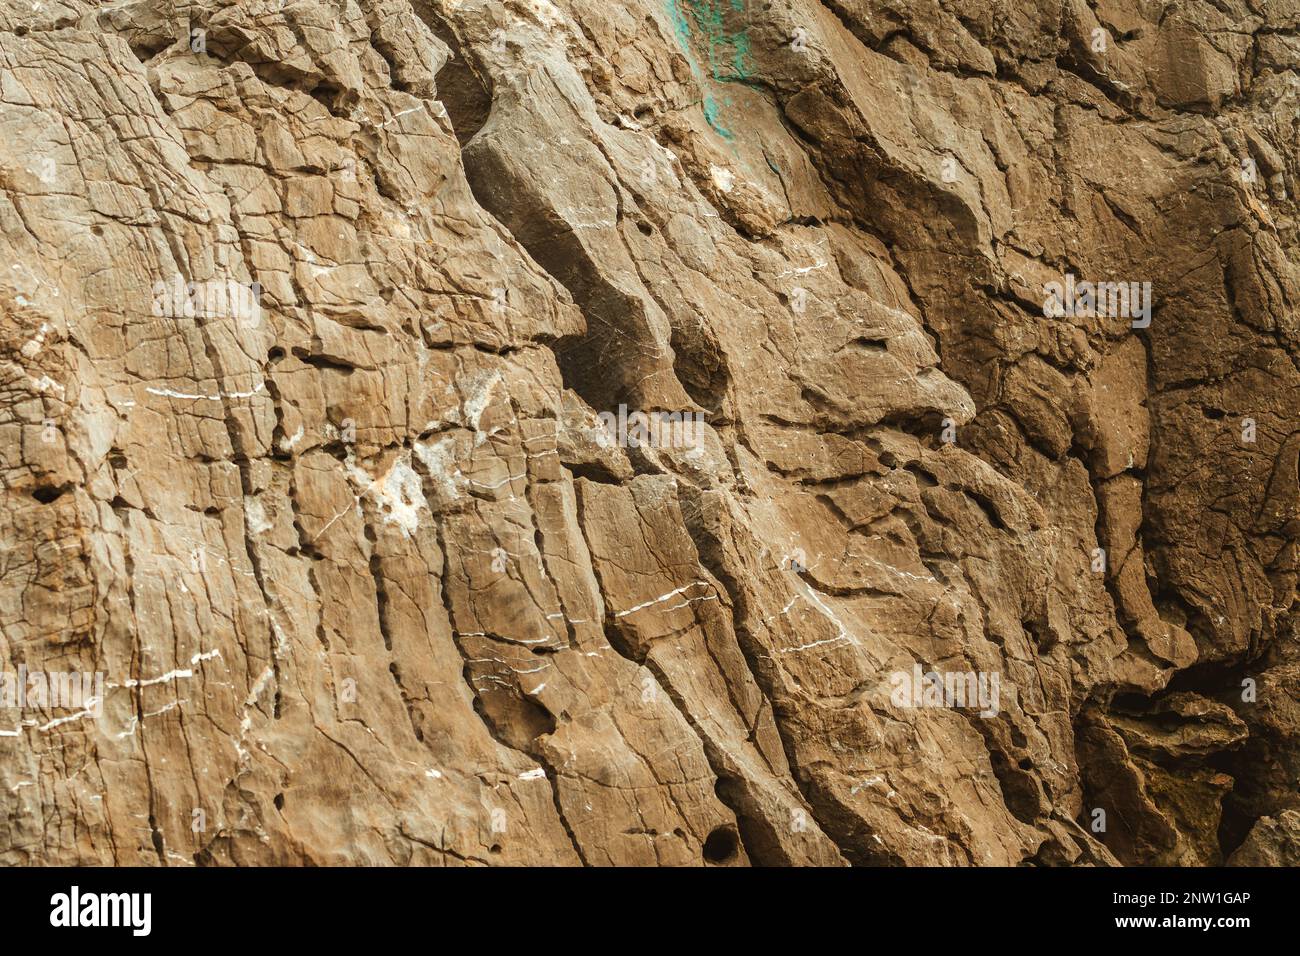 Texture of rough brown rock cliff as natural background Stock Photo